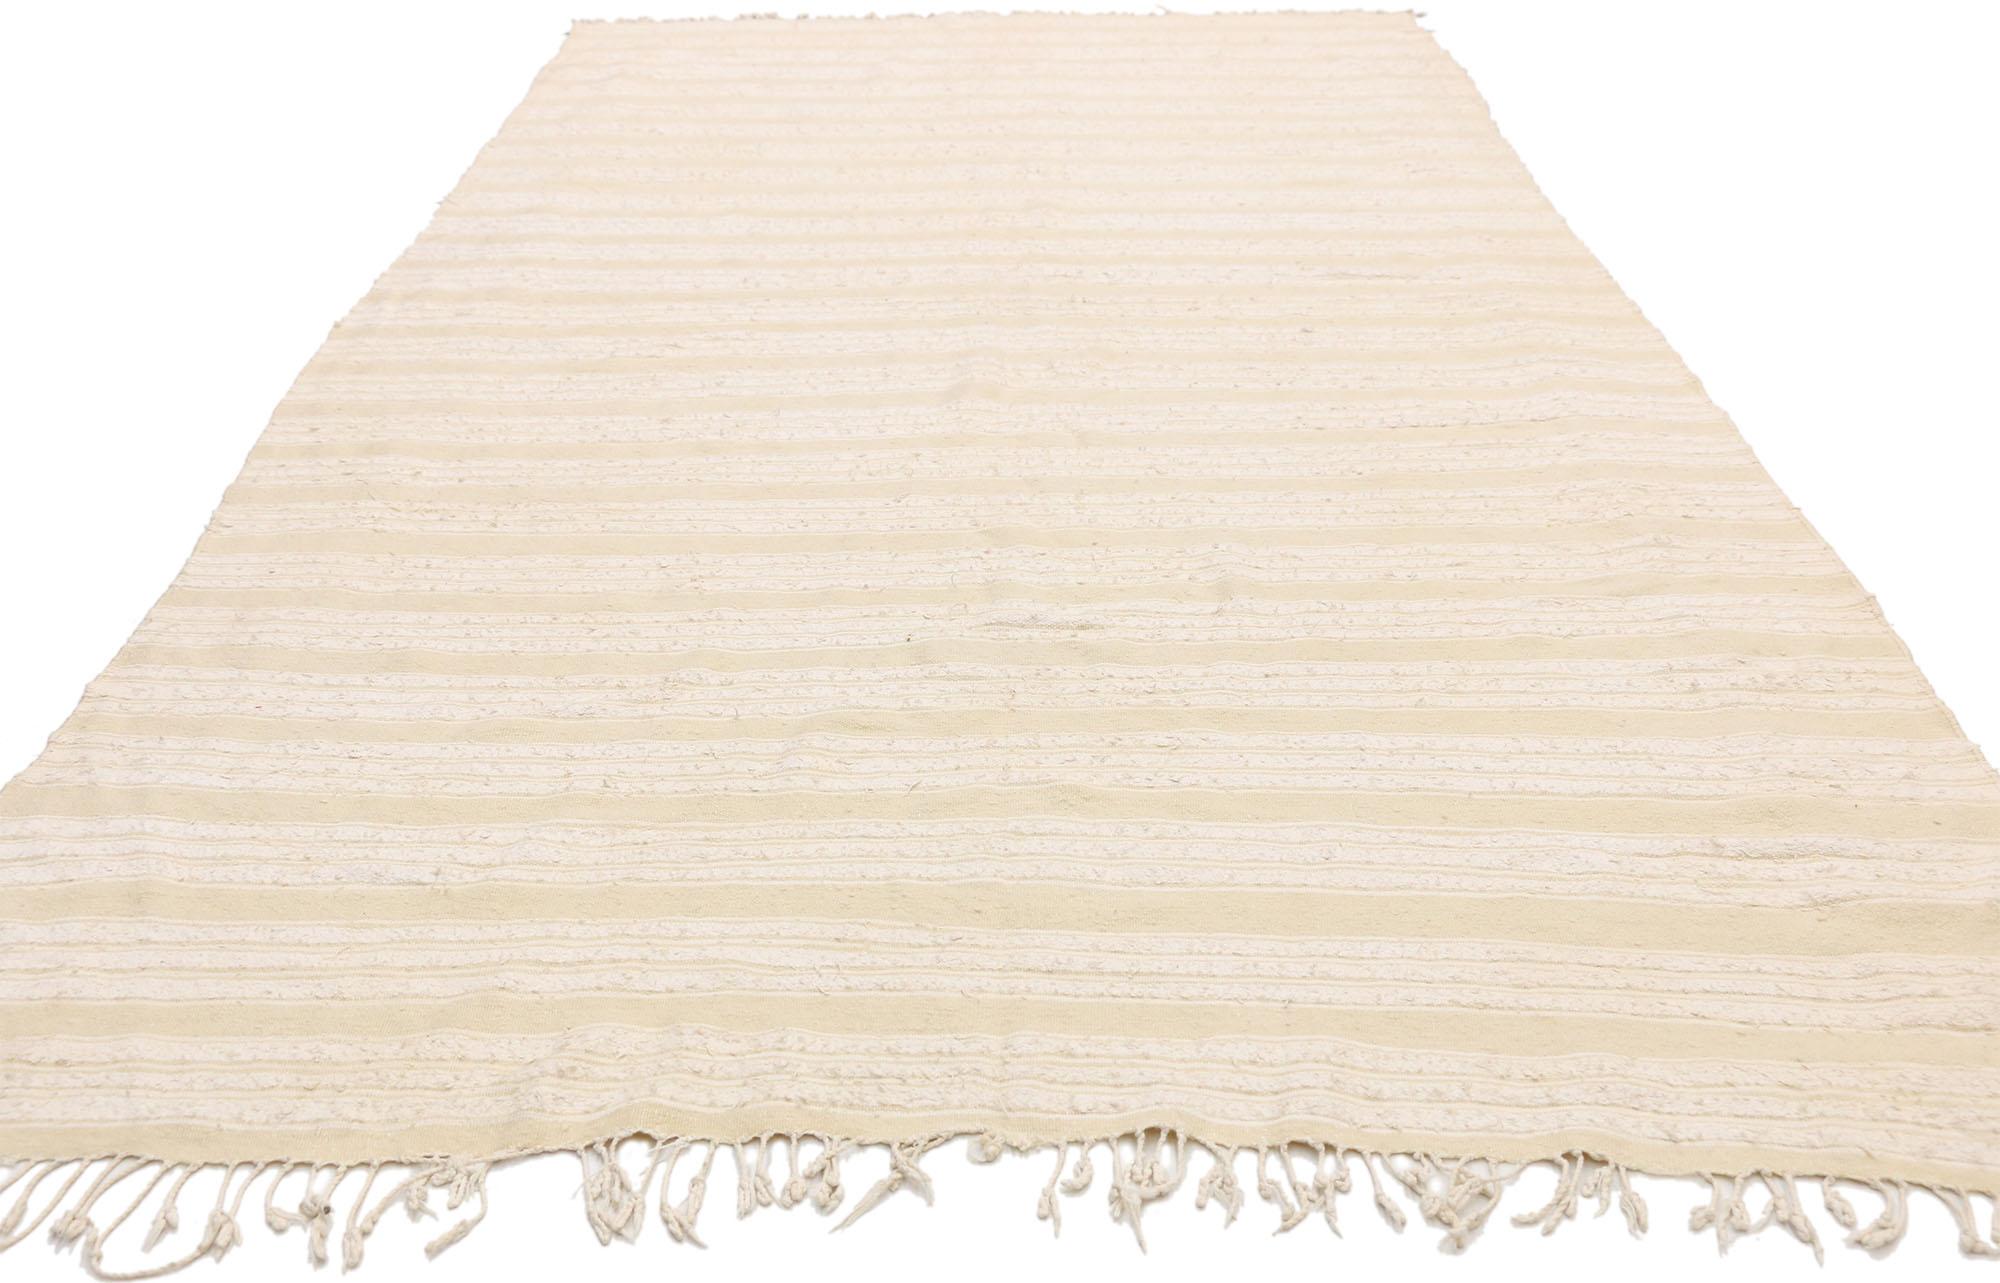 Vintage Moroccan Kilim Rug with Minimalist Scandinavian Style, Neutral Color Rug For Sale 2